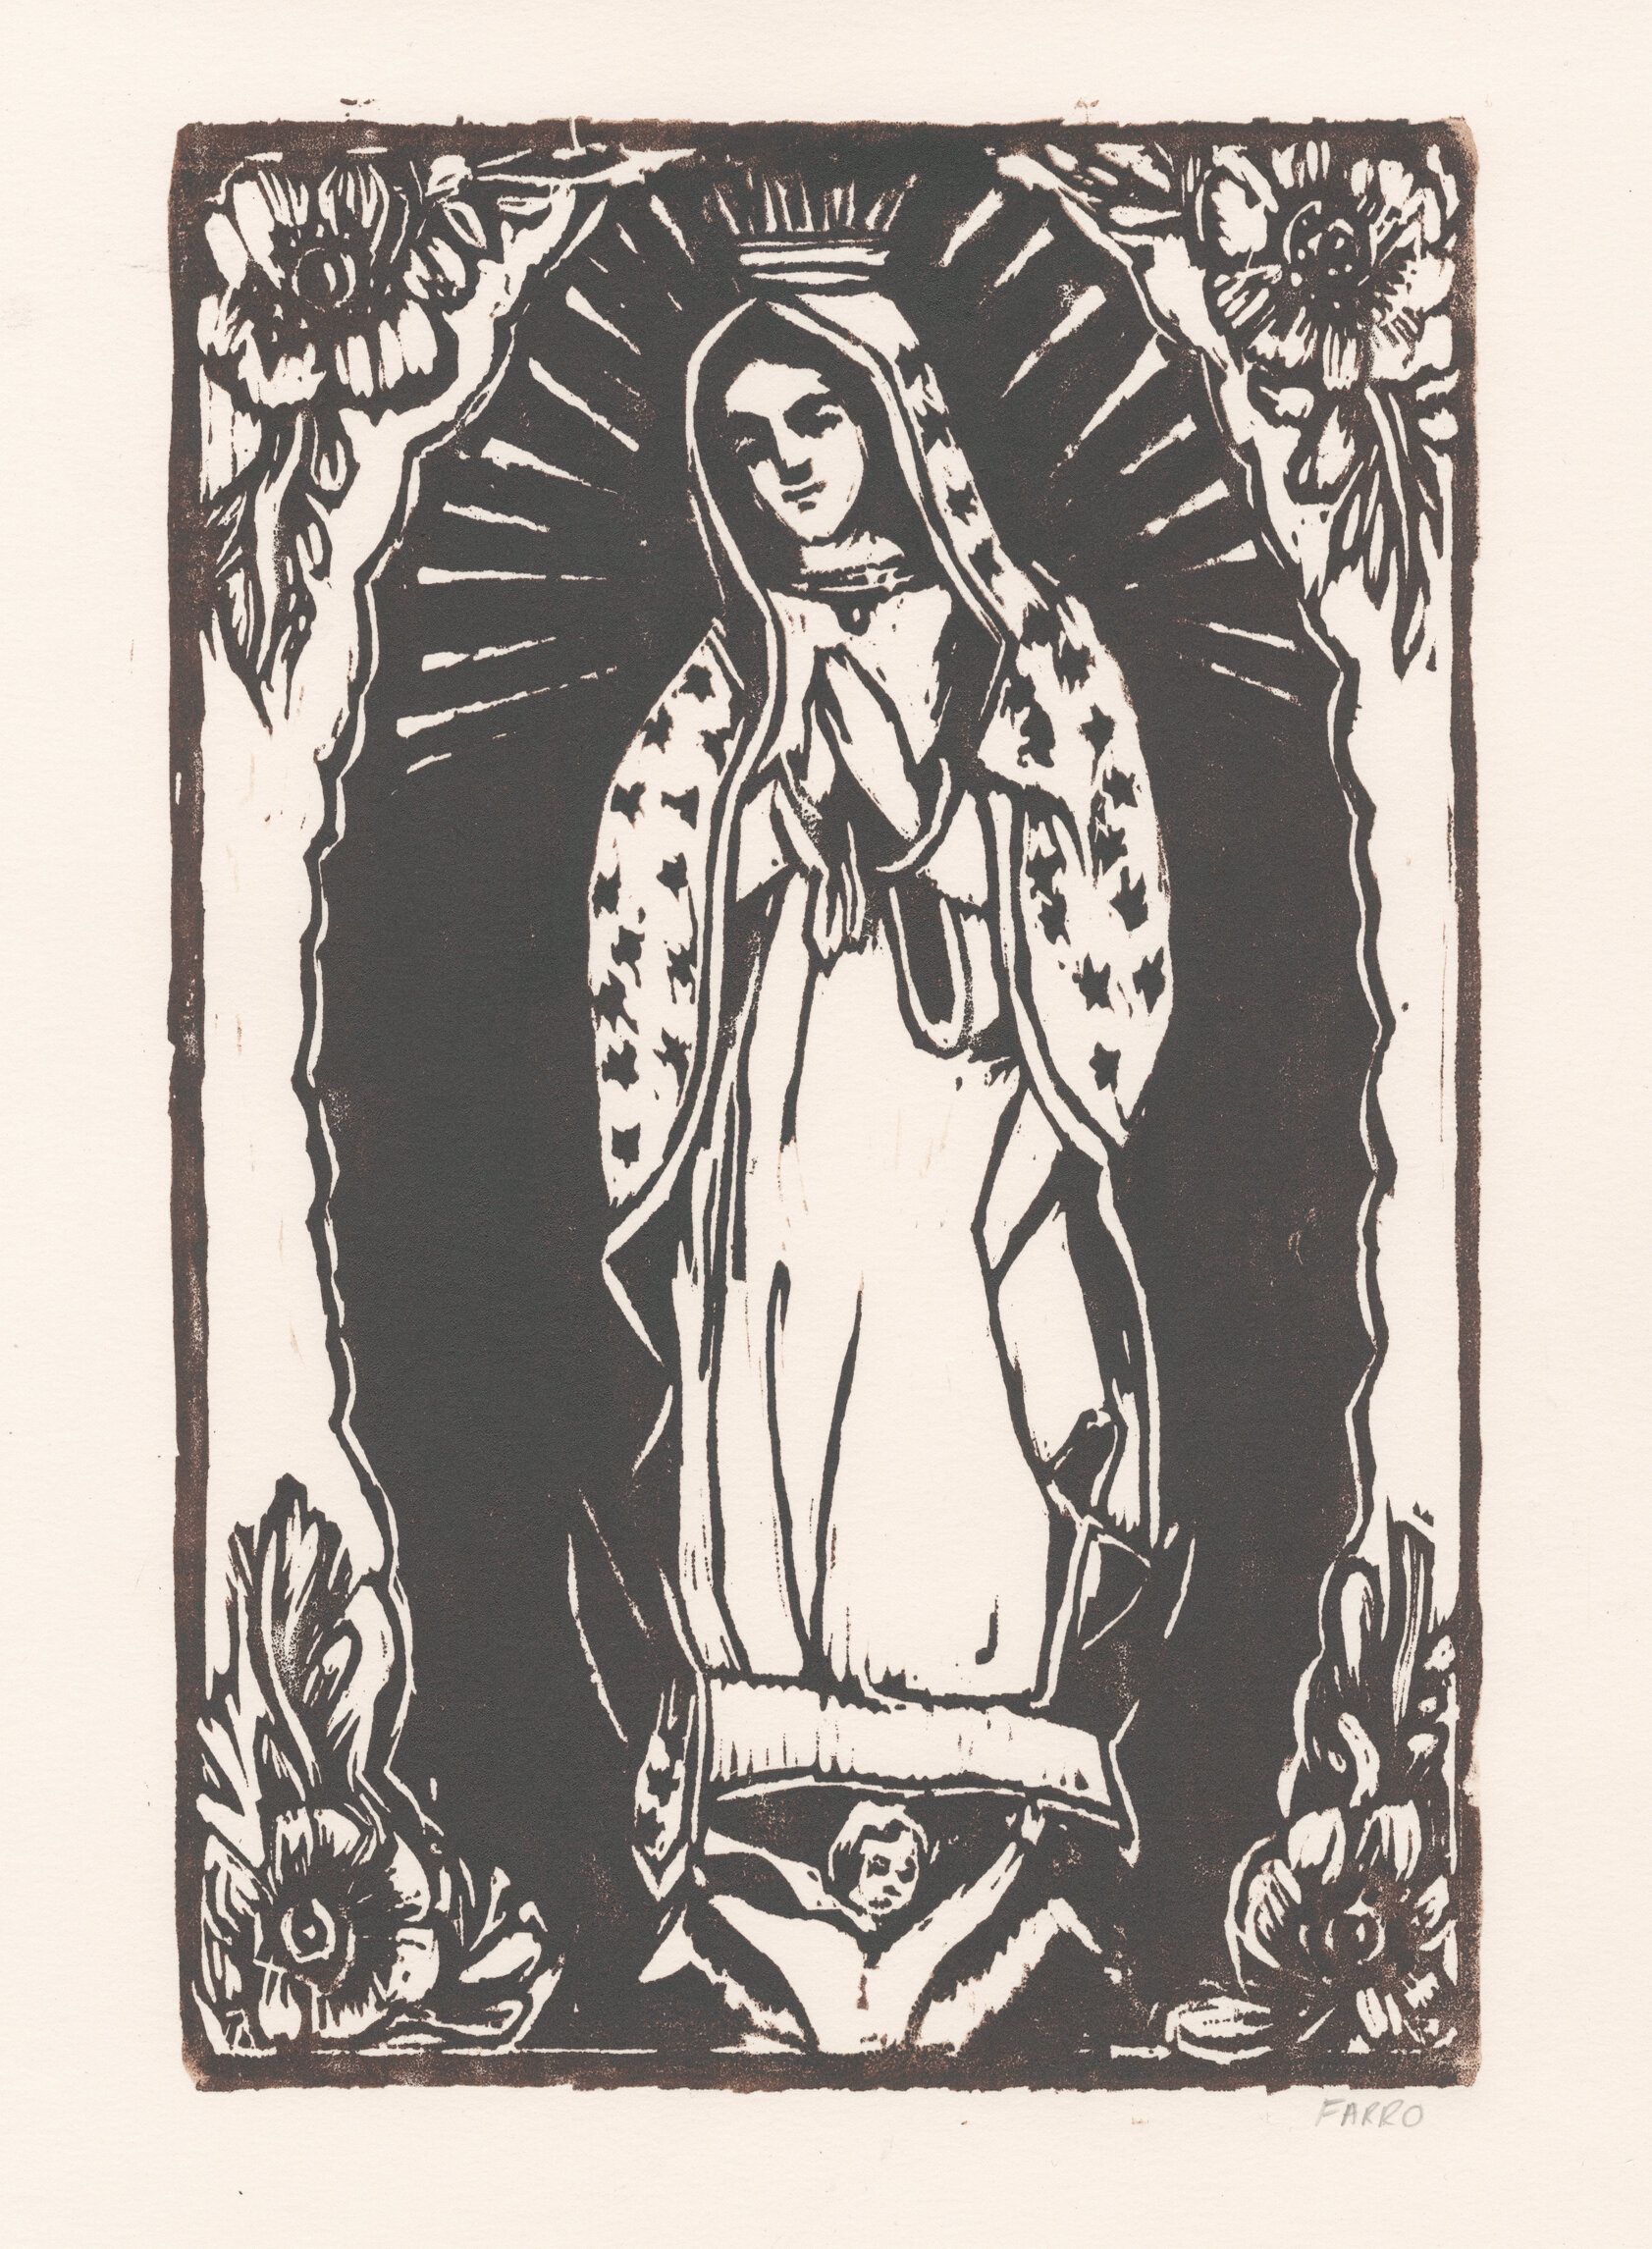   Our Lady of Guadalupe  woodblock print edition of 45 8x12" 2012   purchase  